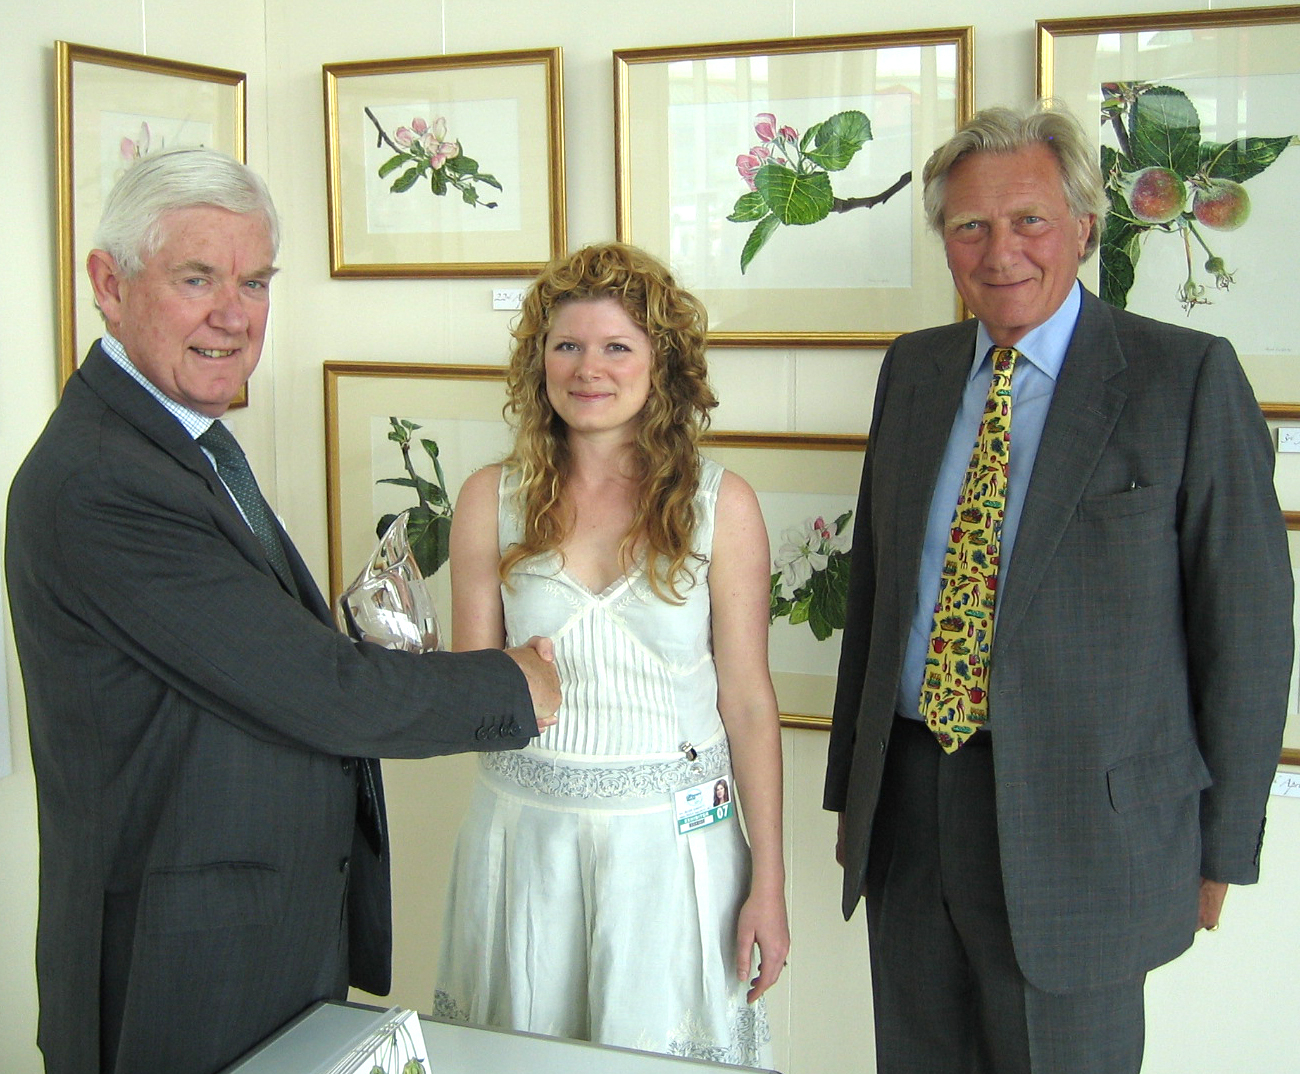 Anna being awarded the RHS Gold Medal